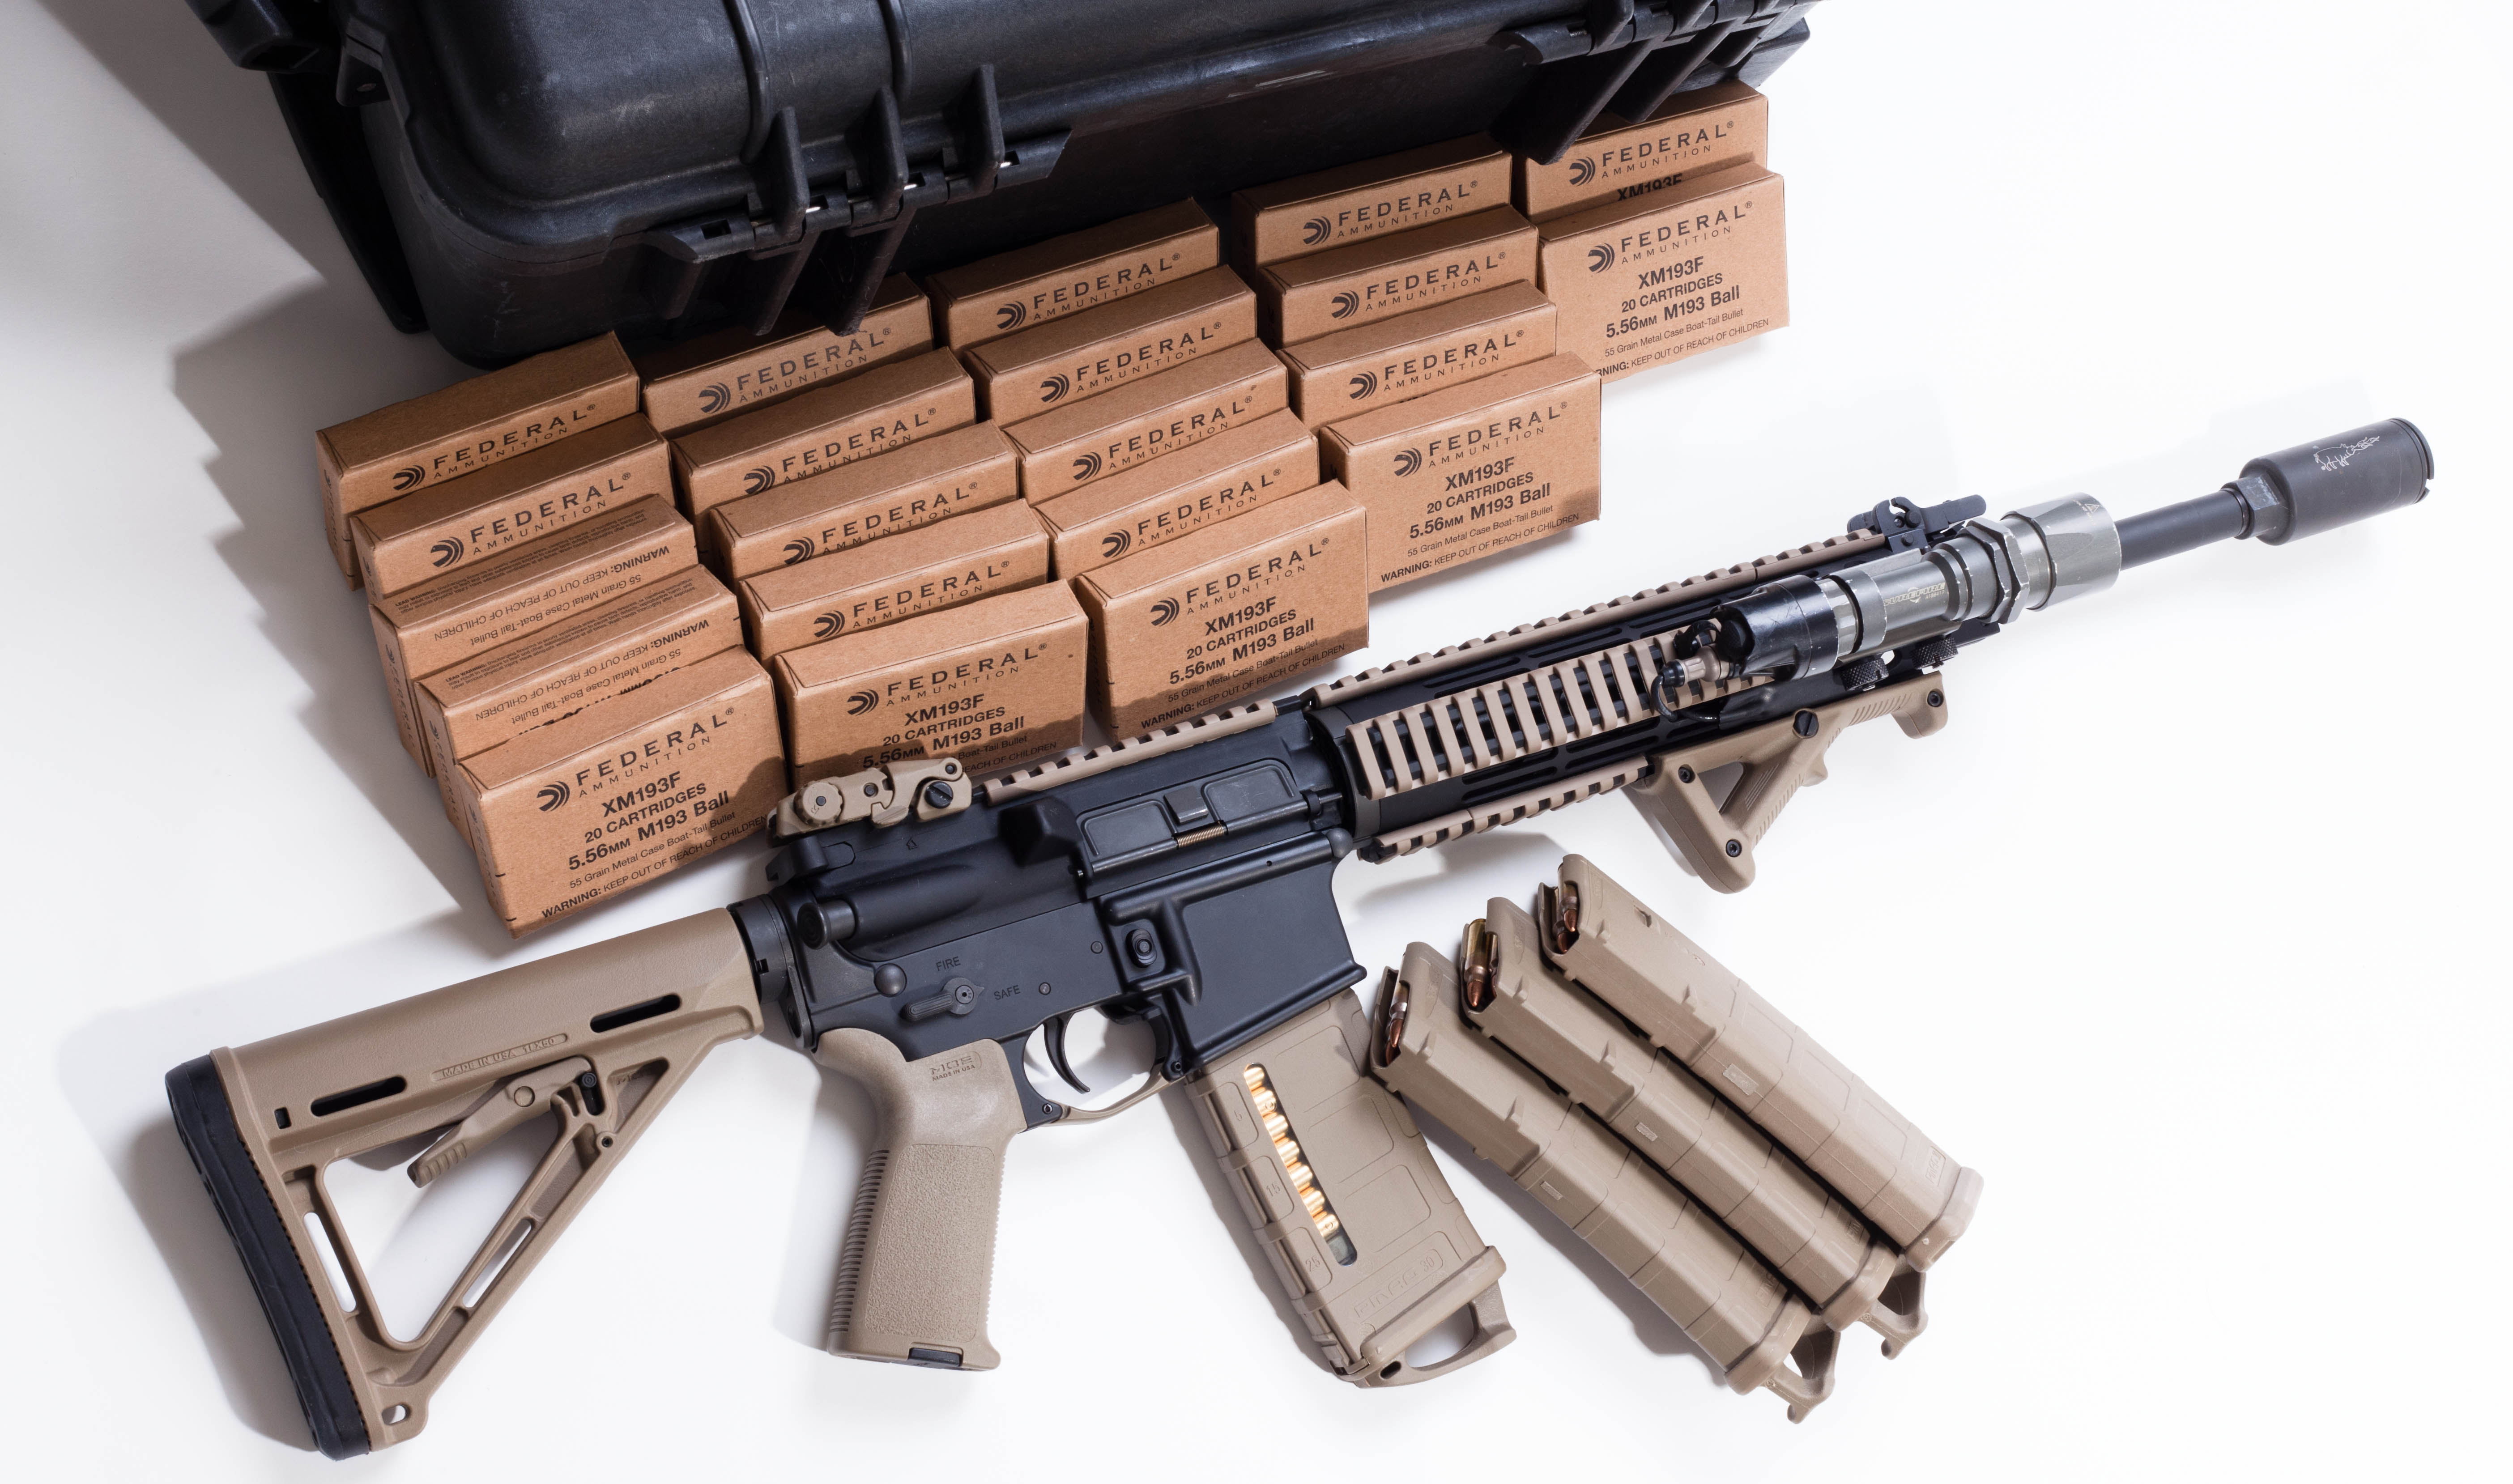 Top 5 reasons why people love to own their own AR-15s